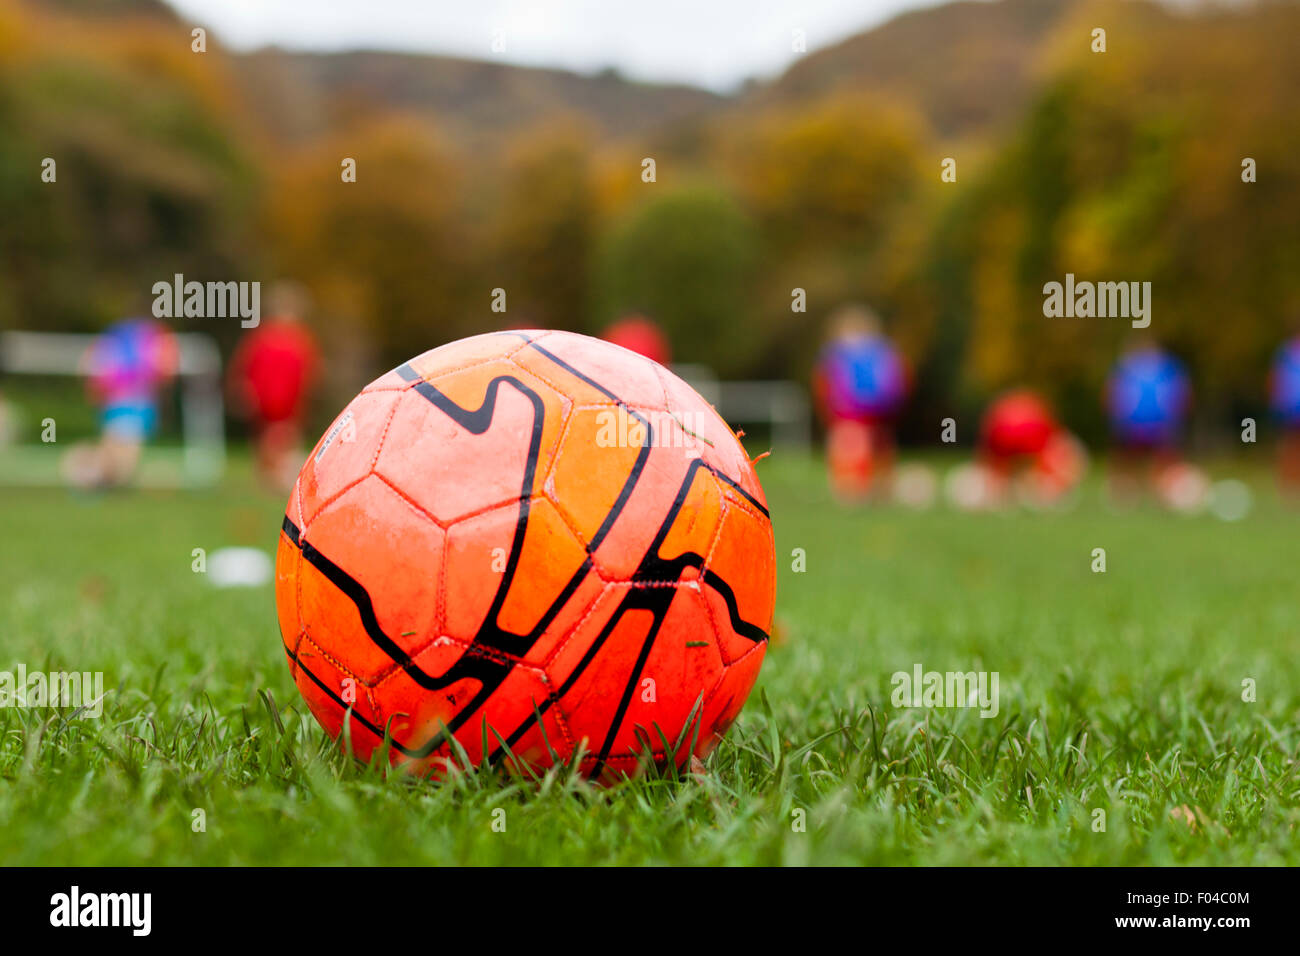 Football with anonymous young footballers in the distance, England Stock Photo